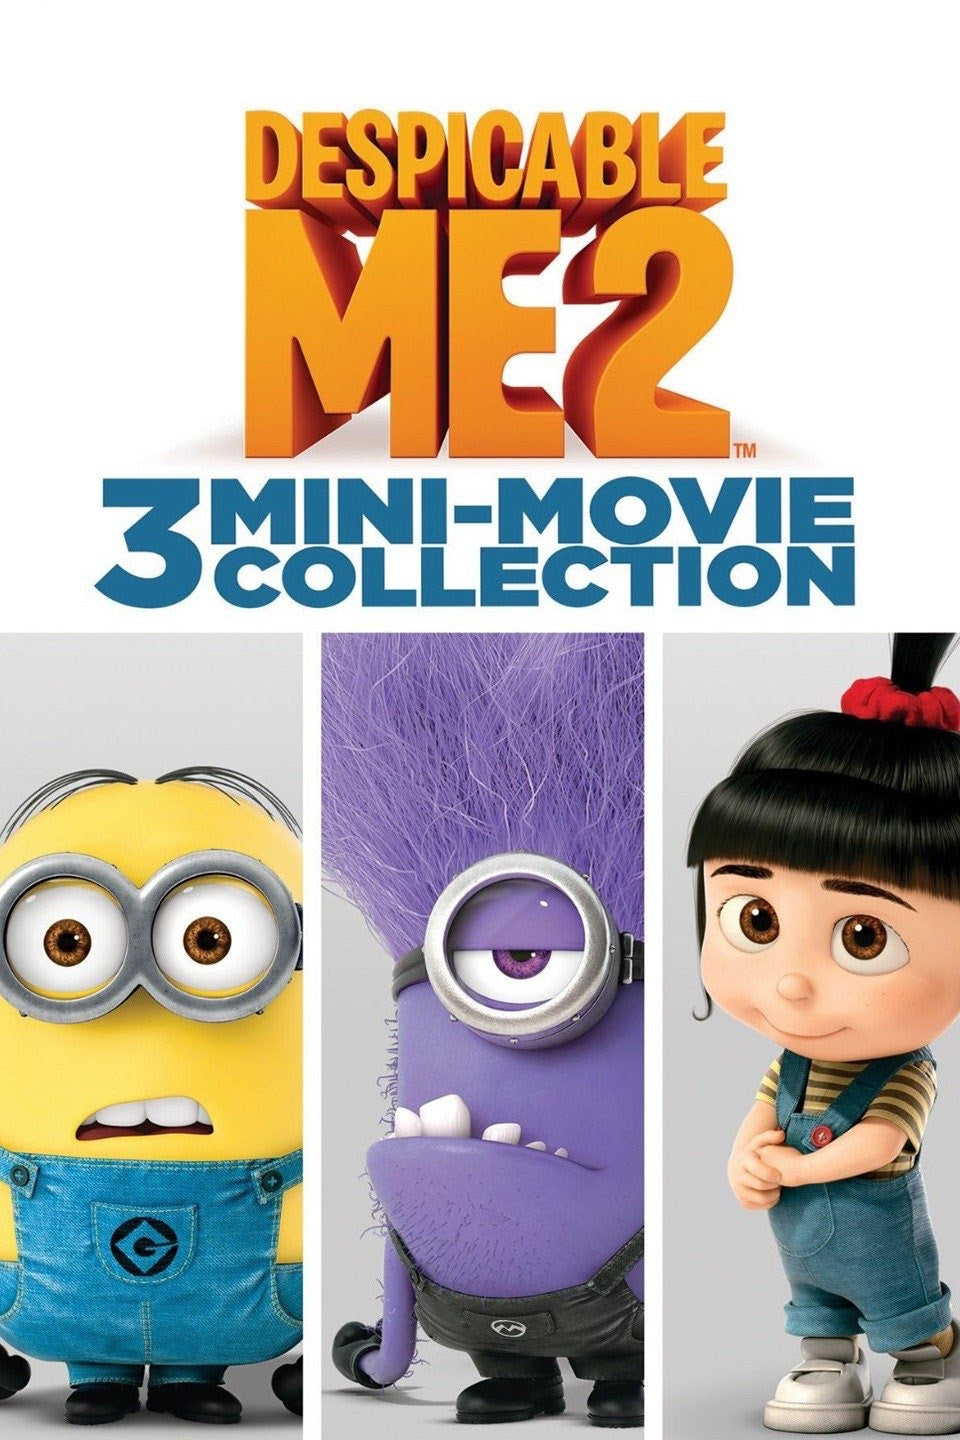 Despicable Me 2: 3 Mini-Movie Collection Vudu HD redemption only